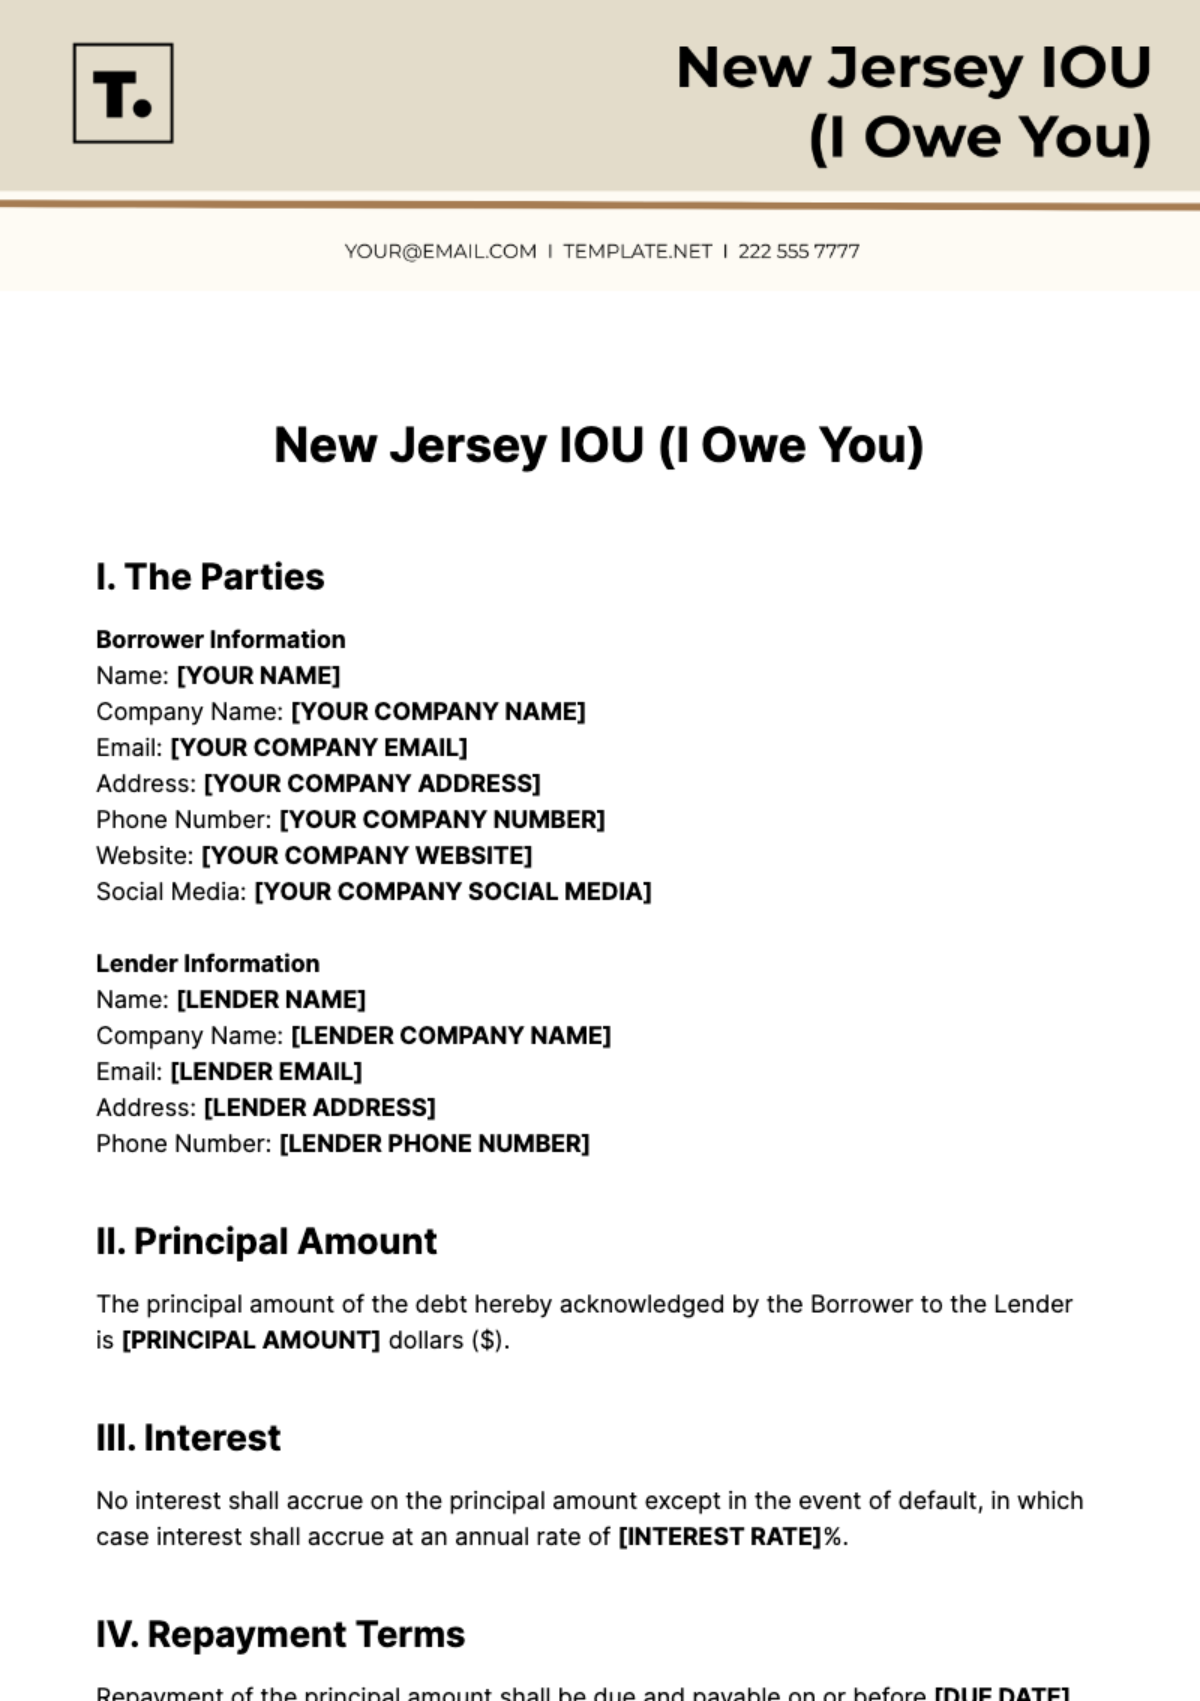 New Jersey IOU Template